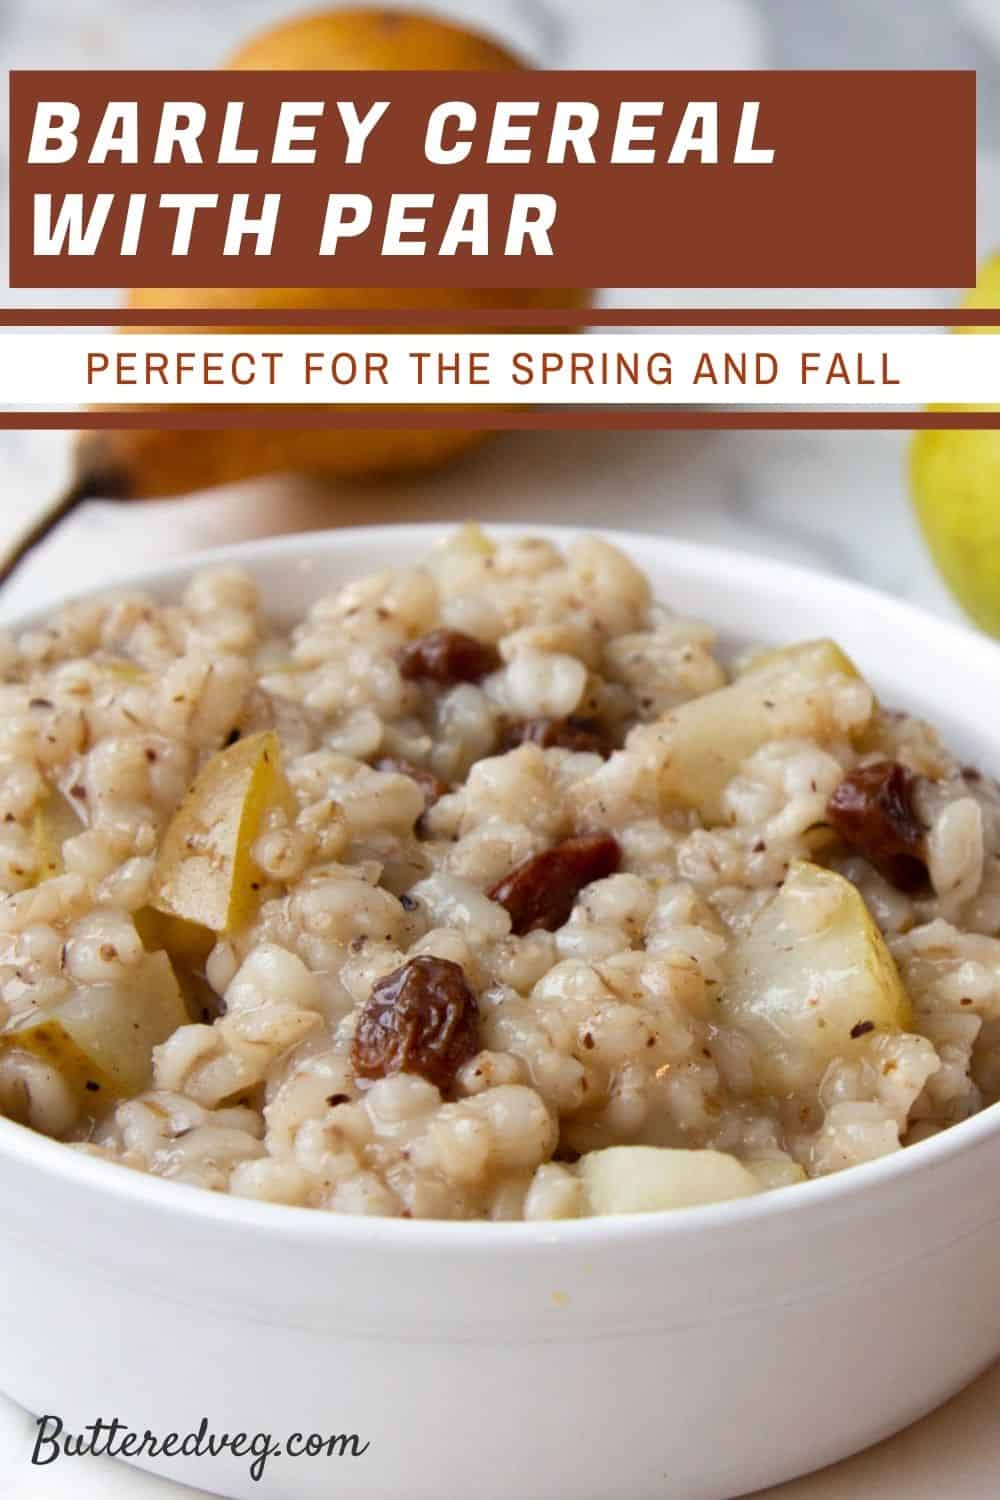 Barley Cereal with Pear